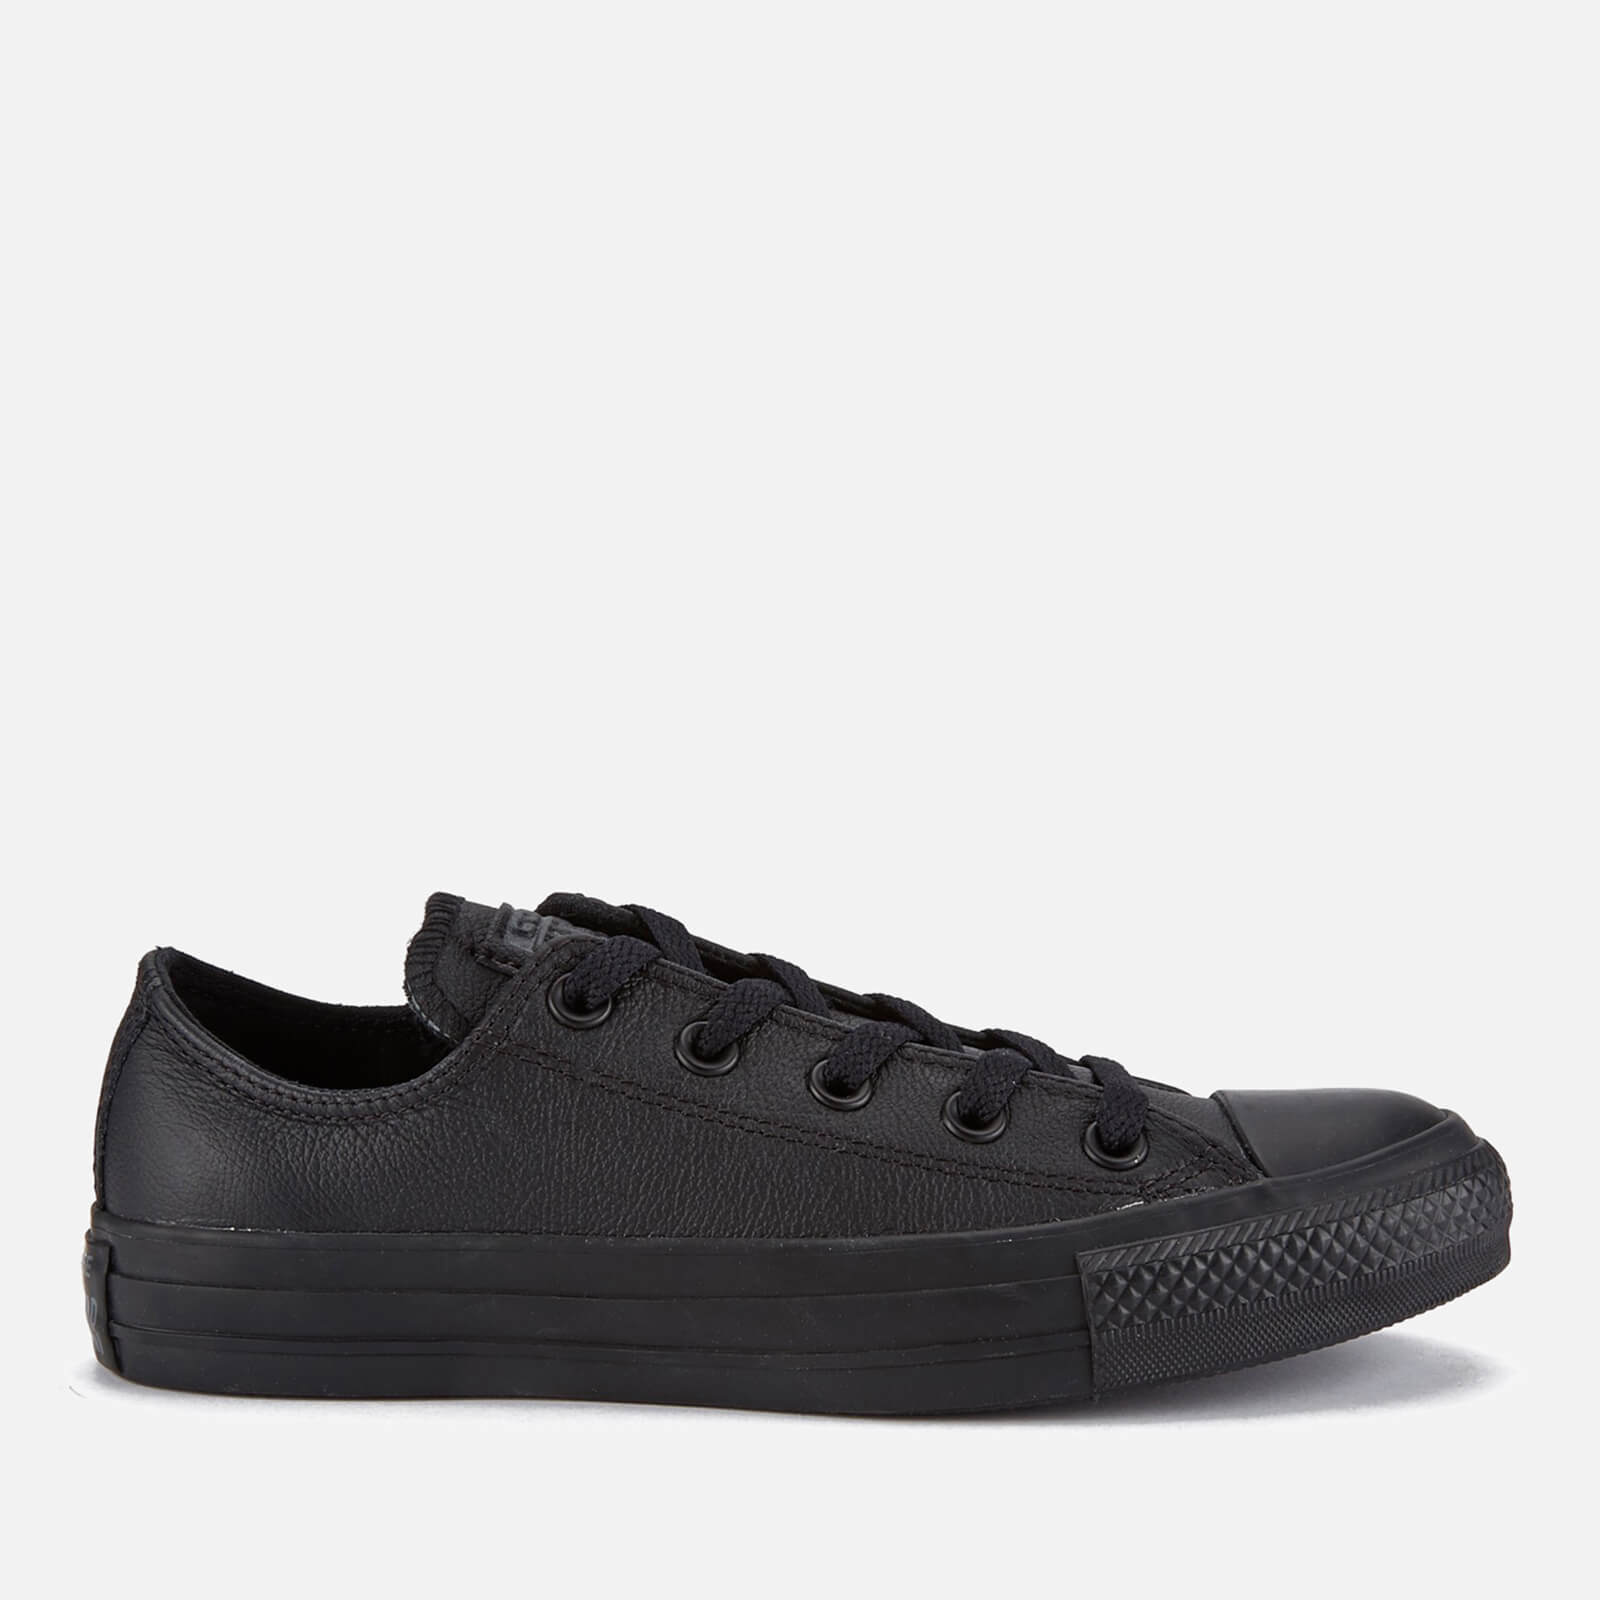 Converse Chuck Taylor All Star Ox Trainers - Black Mono - UK 8